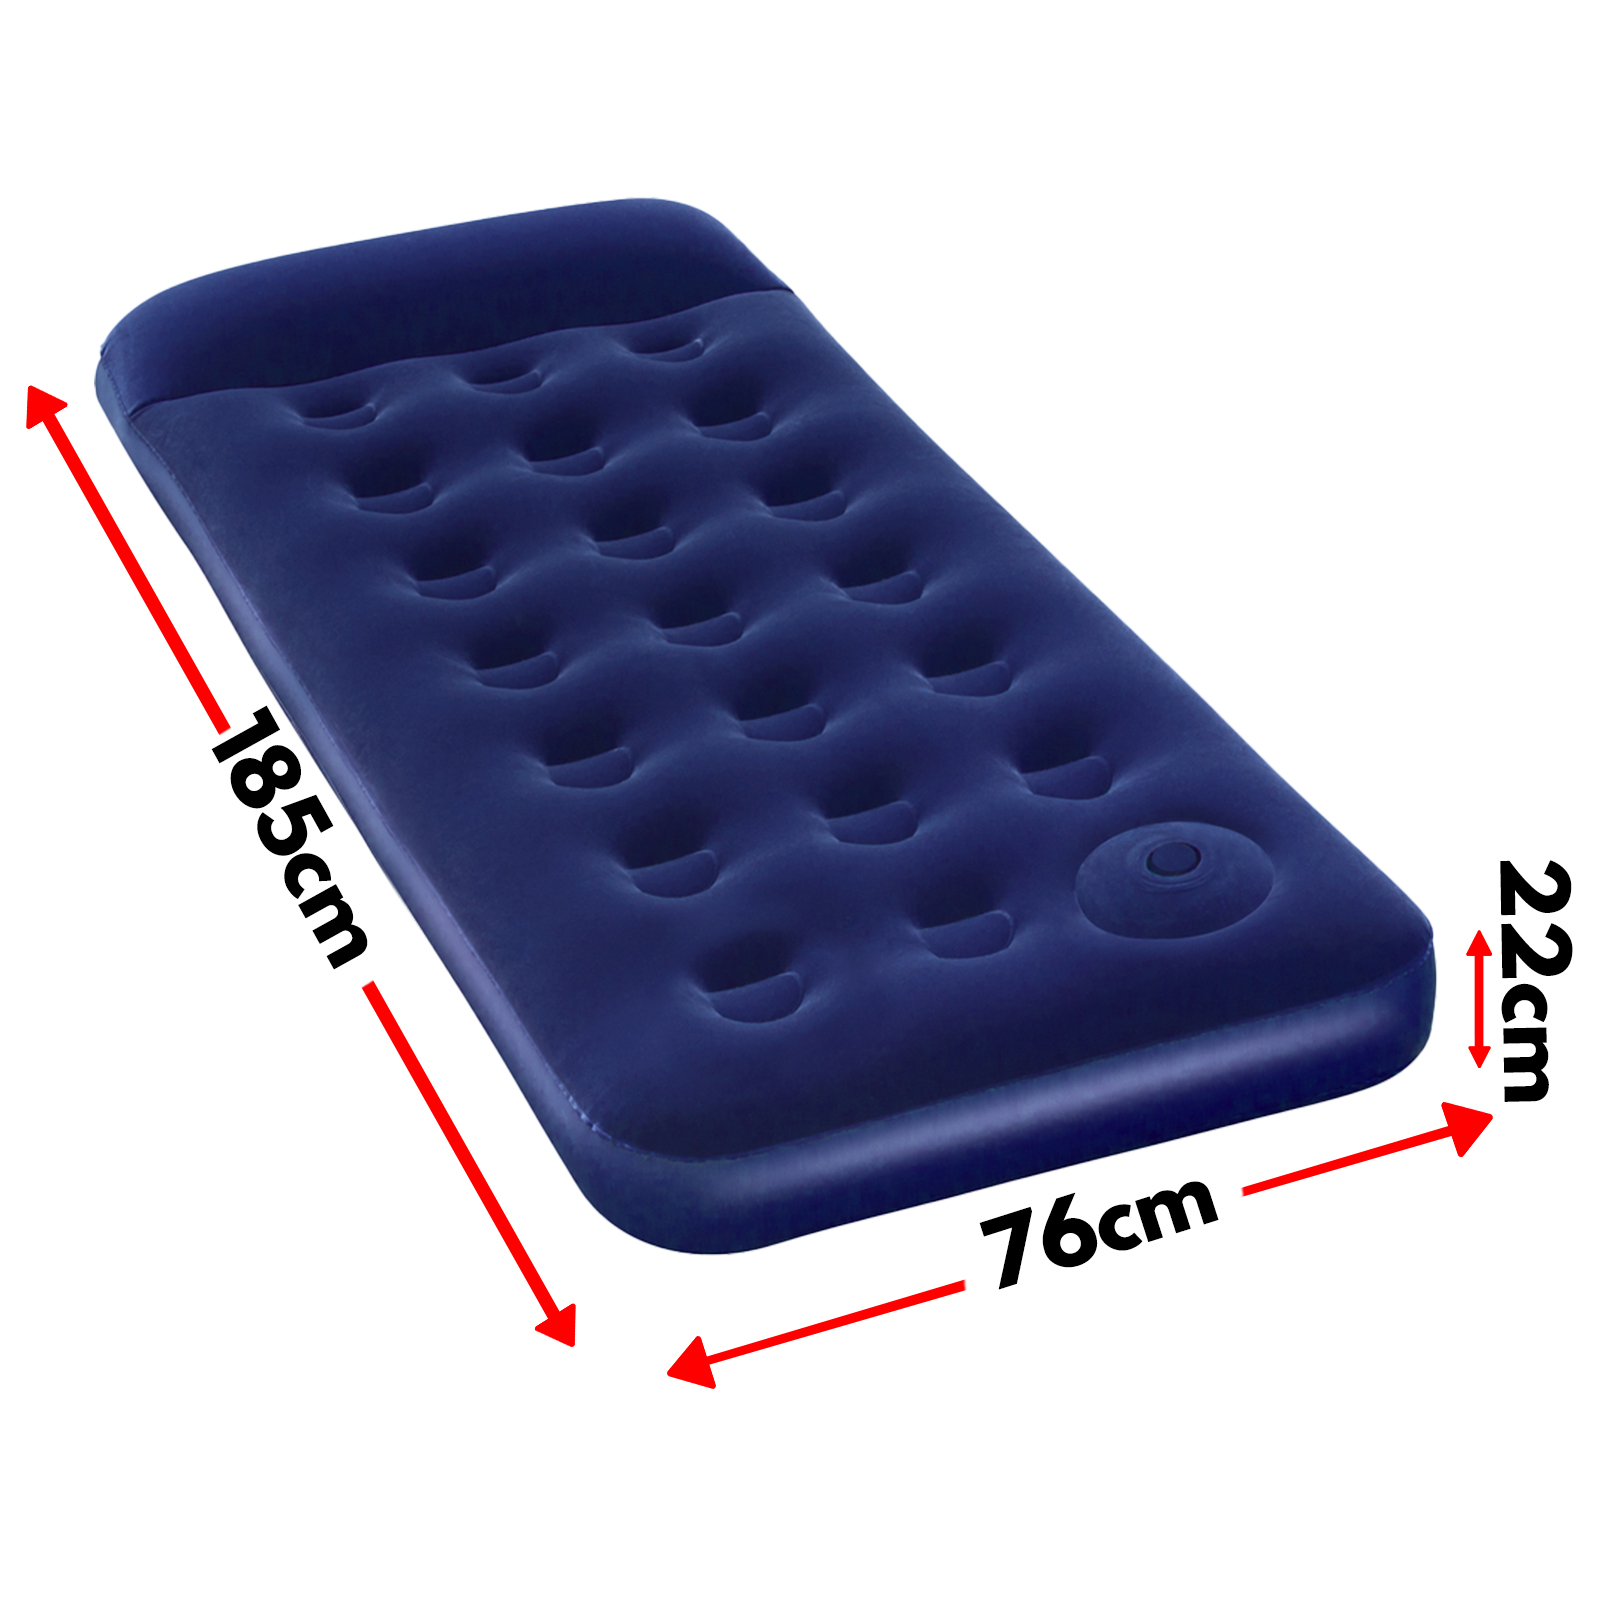 Single Size Inflatable Air Bed Mattress 22CM Built-in Foot Pump - Navy